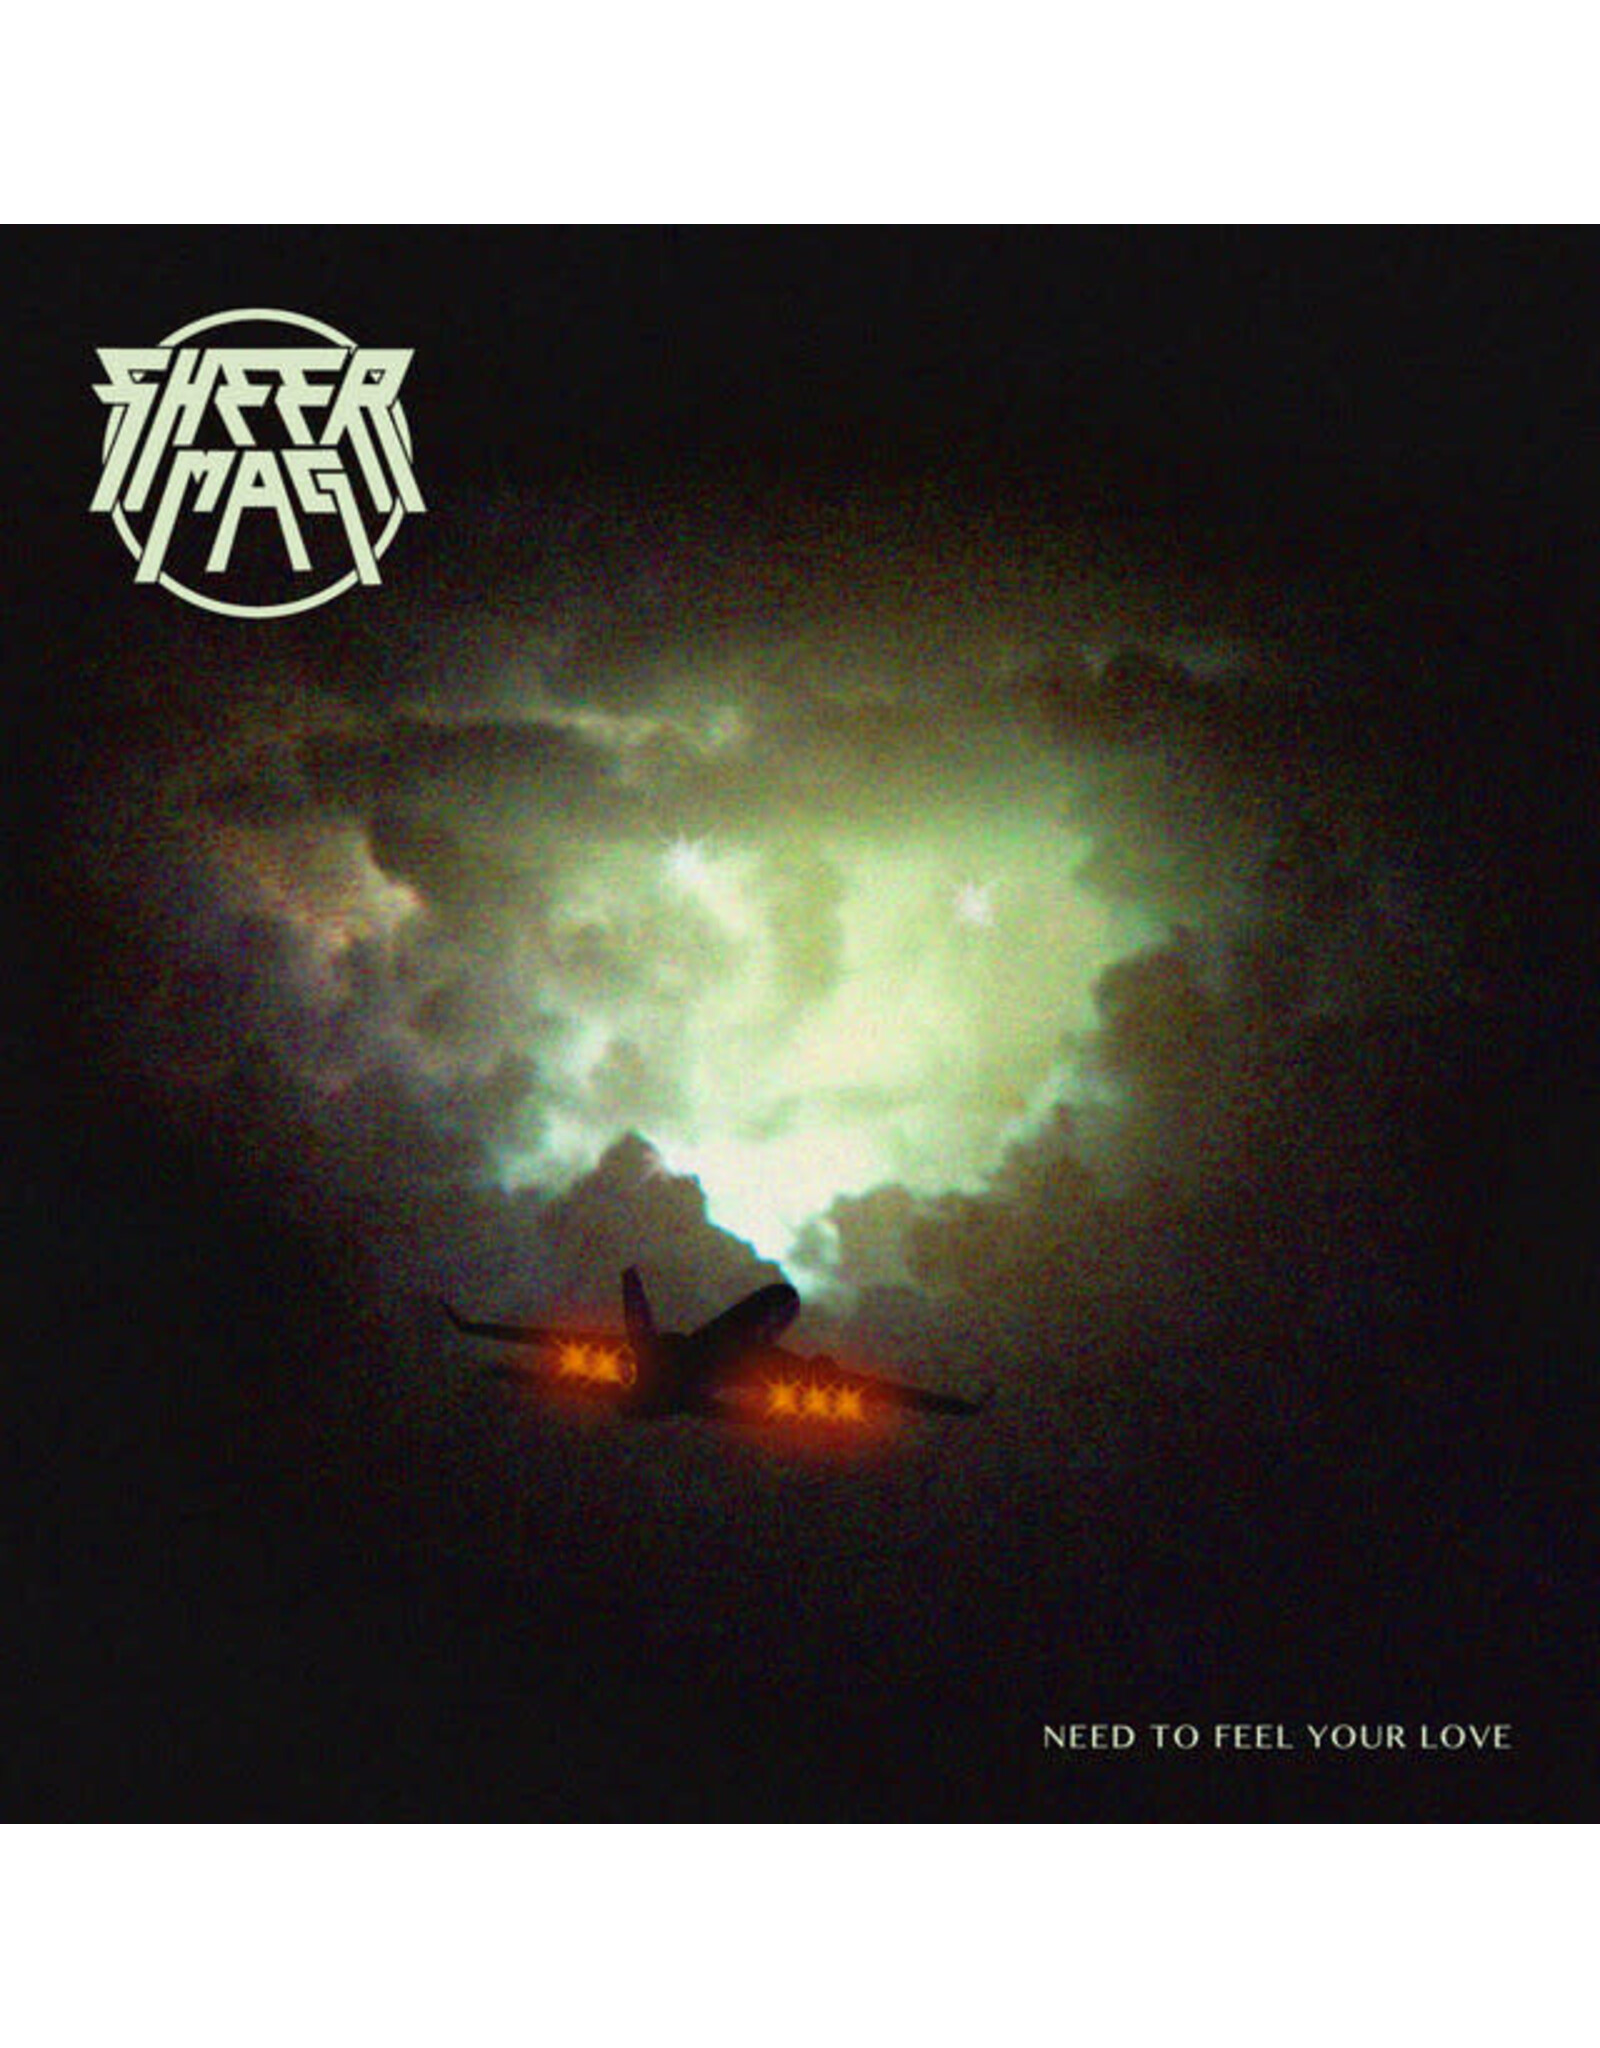 Third Man Sheer Mag: Need To Feel Your Love LP